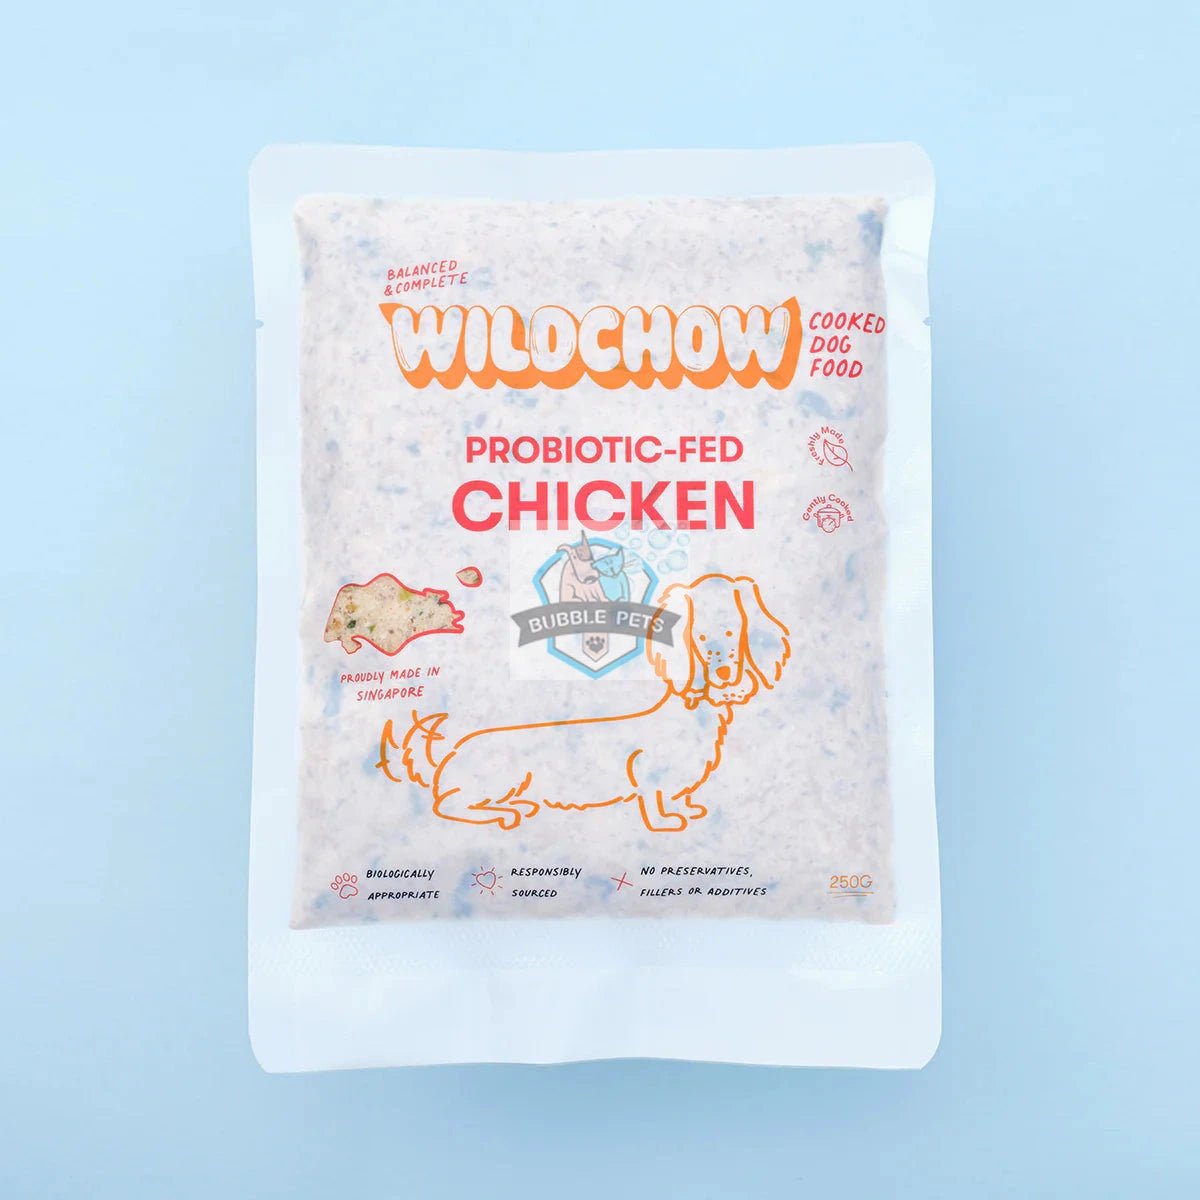 WildChow Chicken Cooked Dog Food